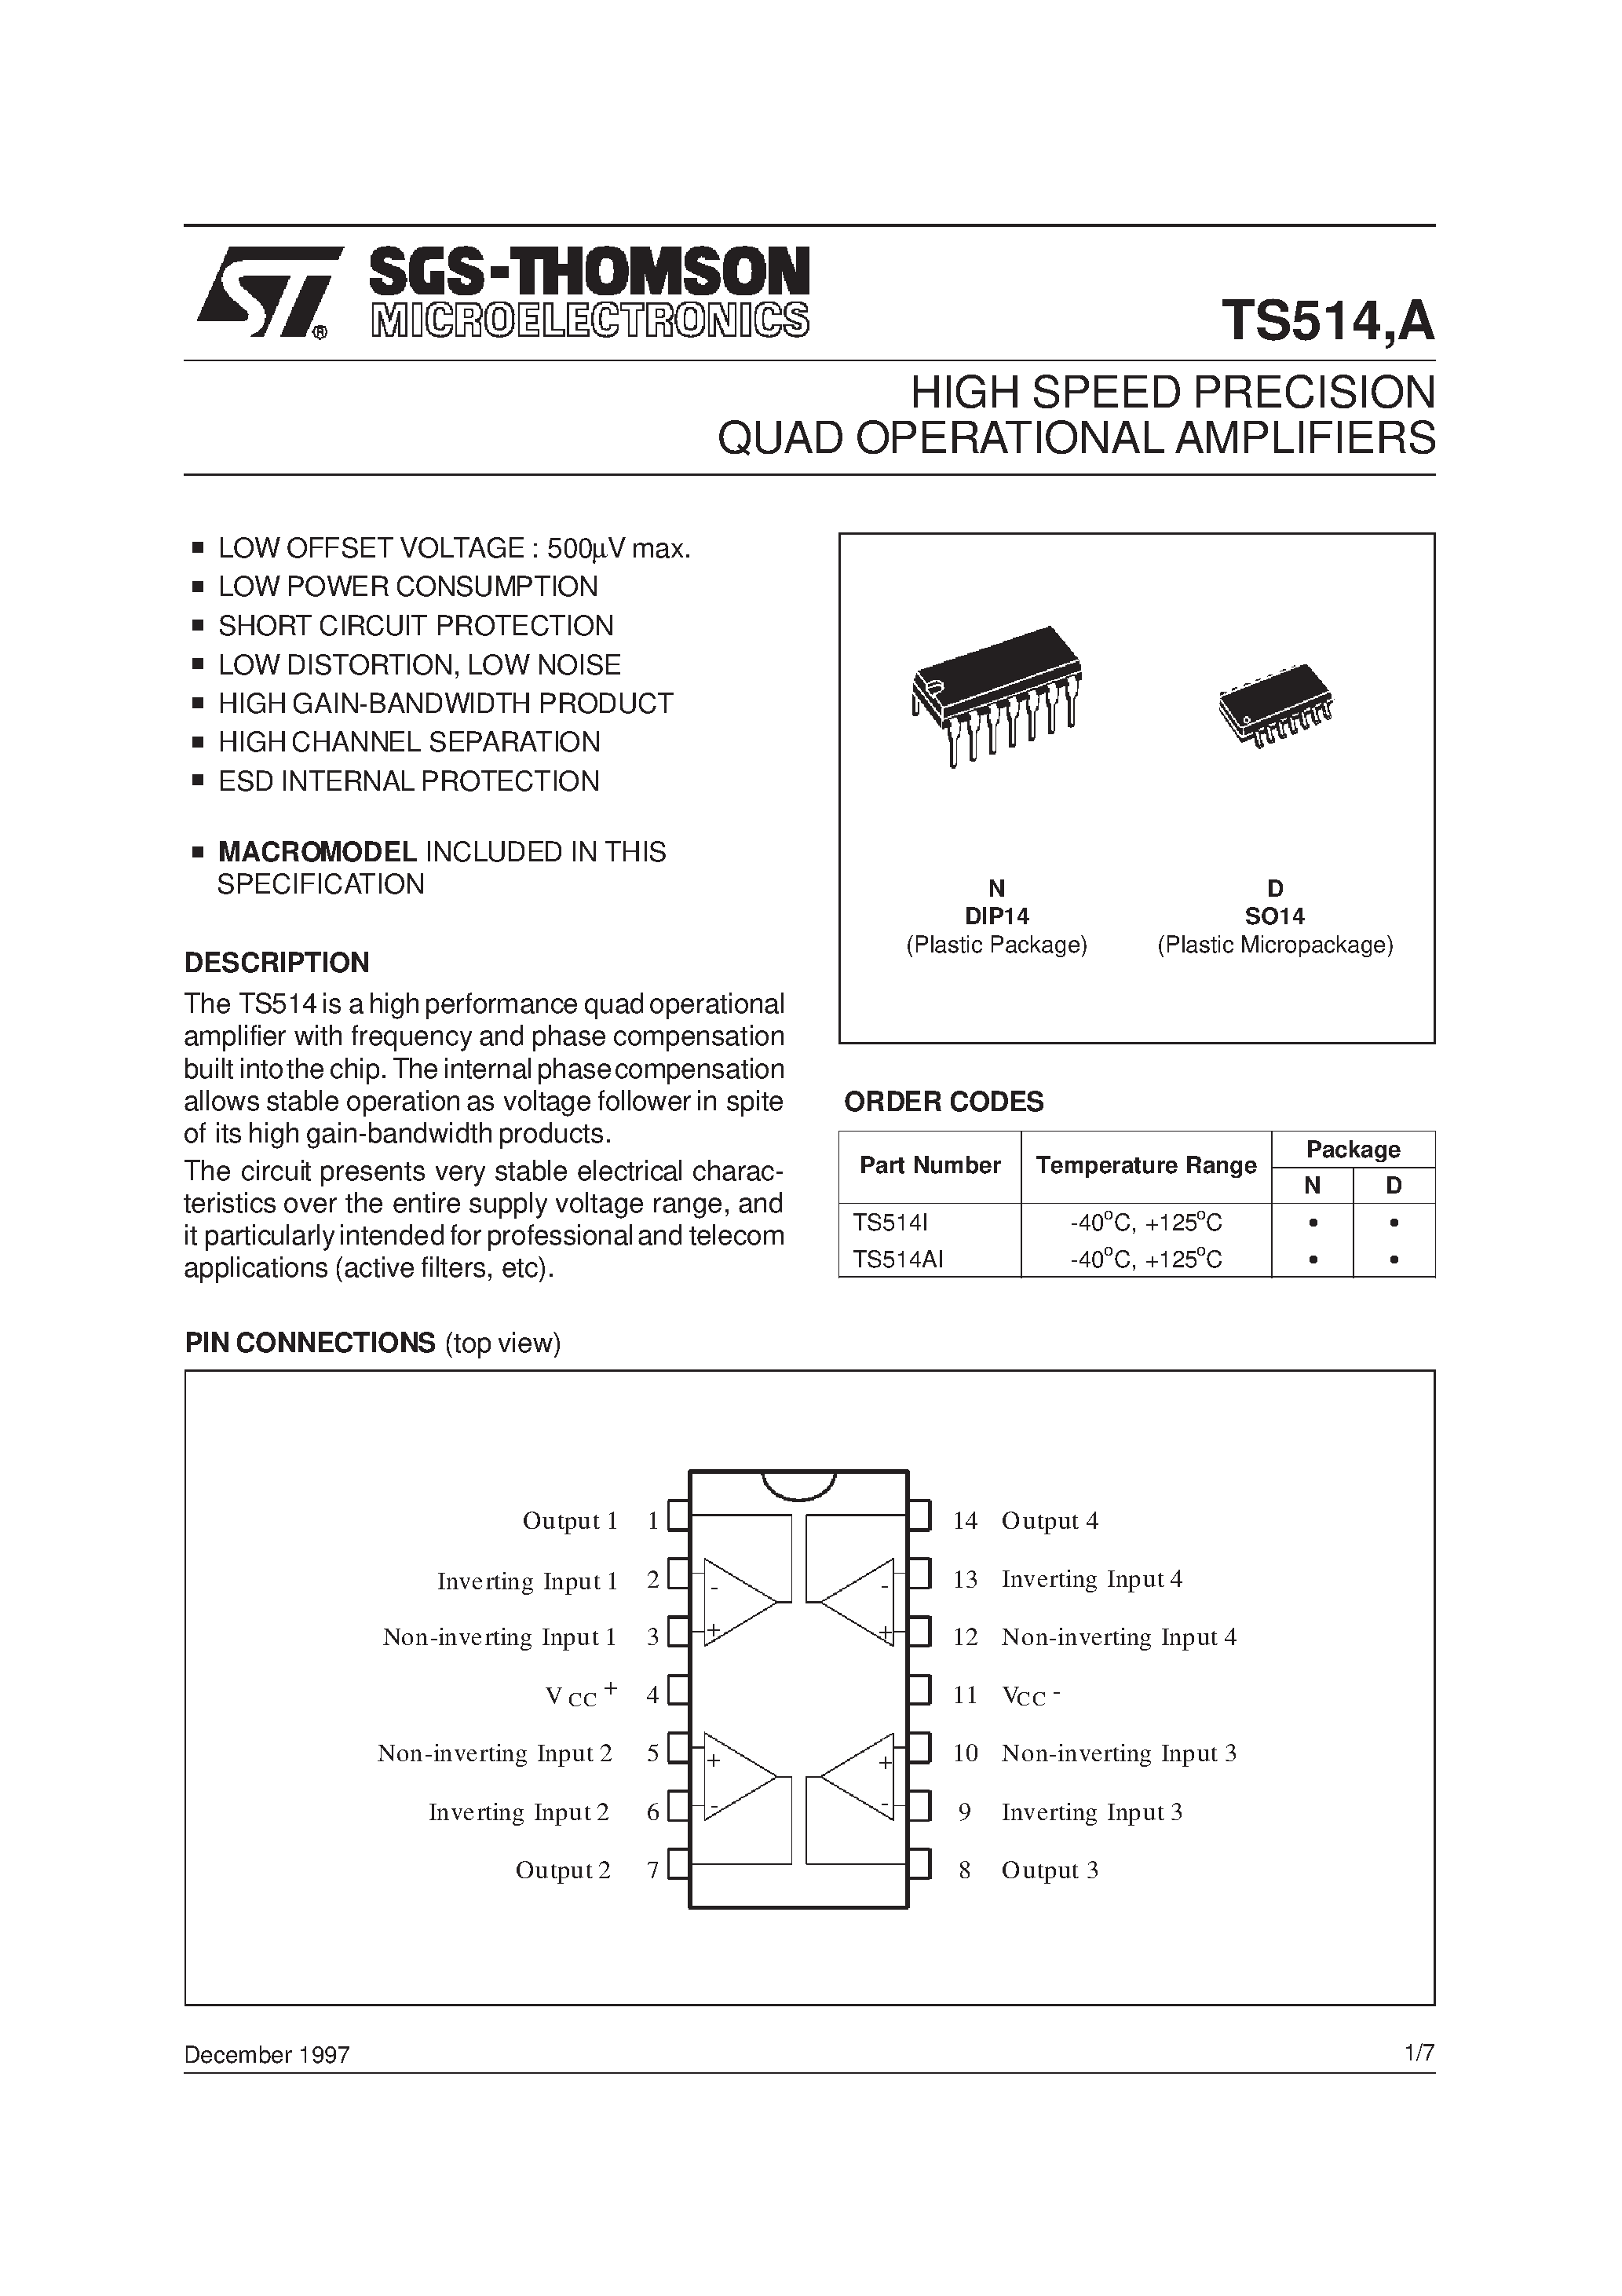 Datasheet TS514AIN - HIGH SPEED PRECISION QUAD OPERATIONAL AMPLIFIERS page 1